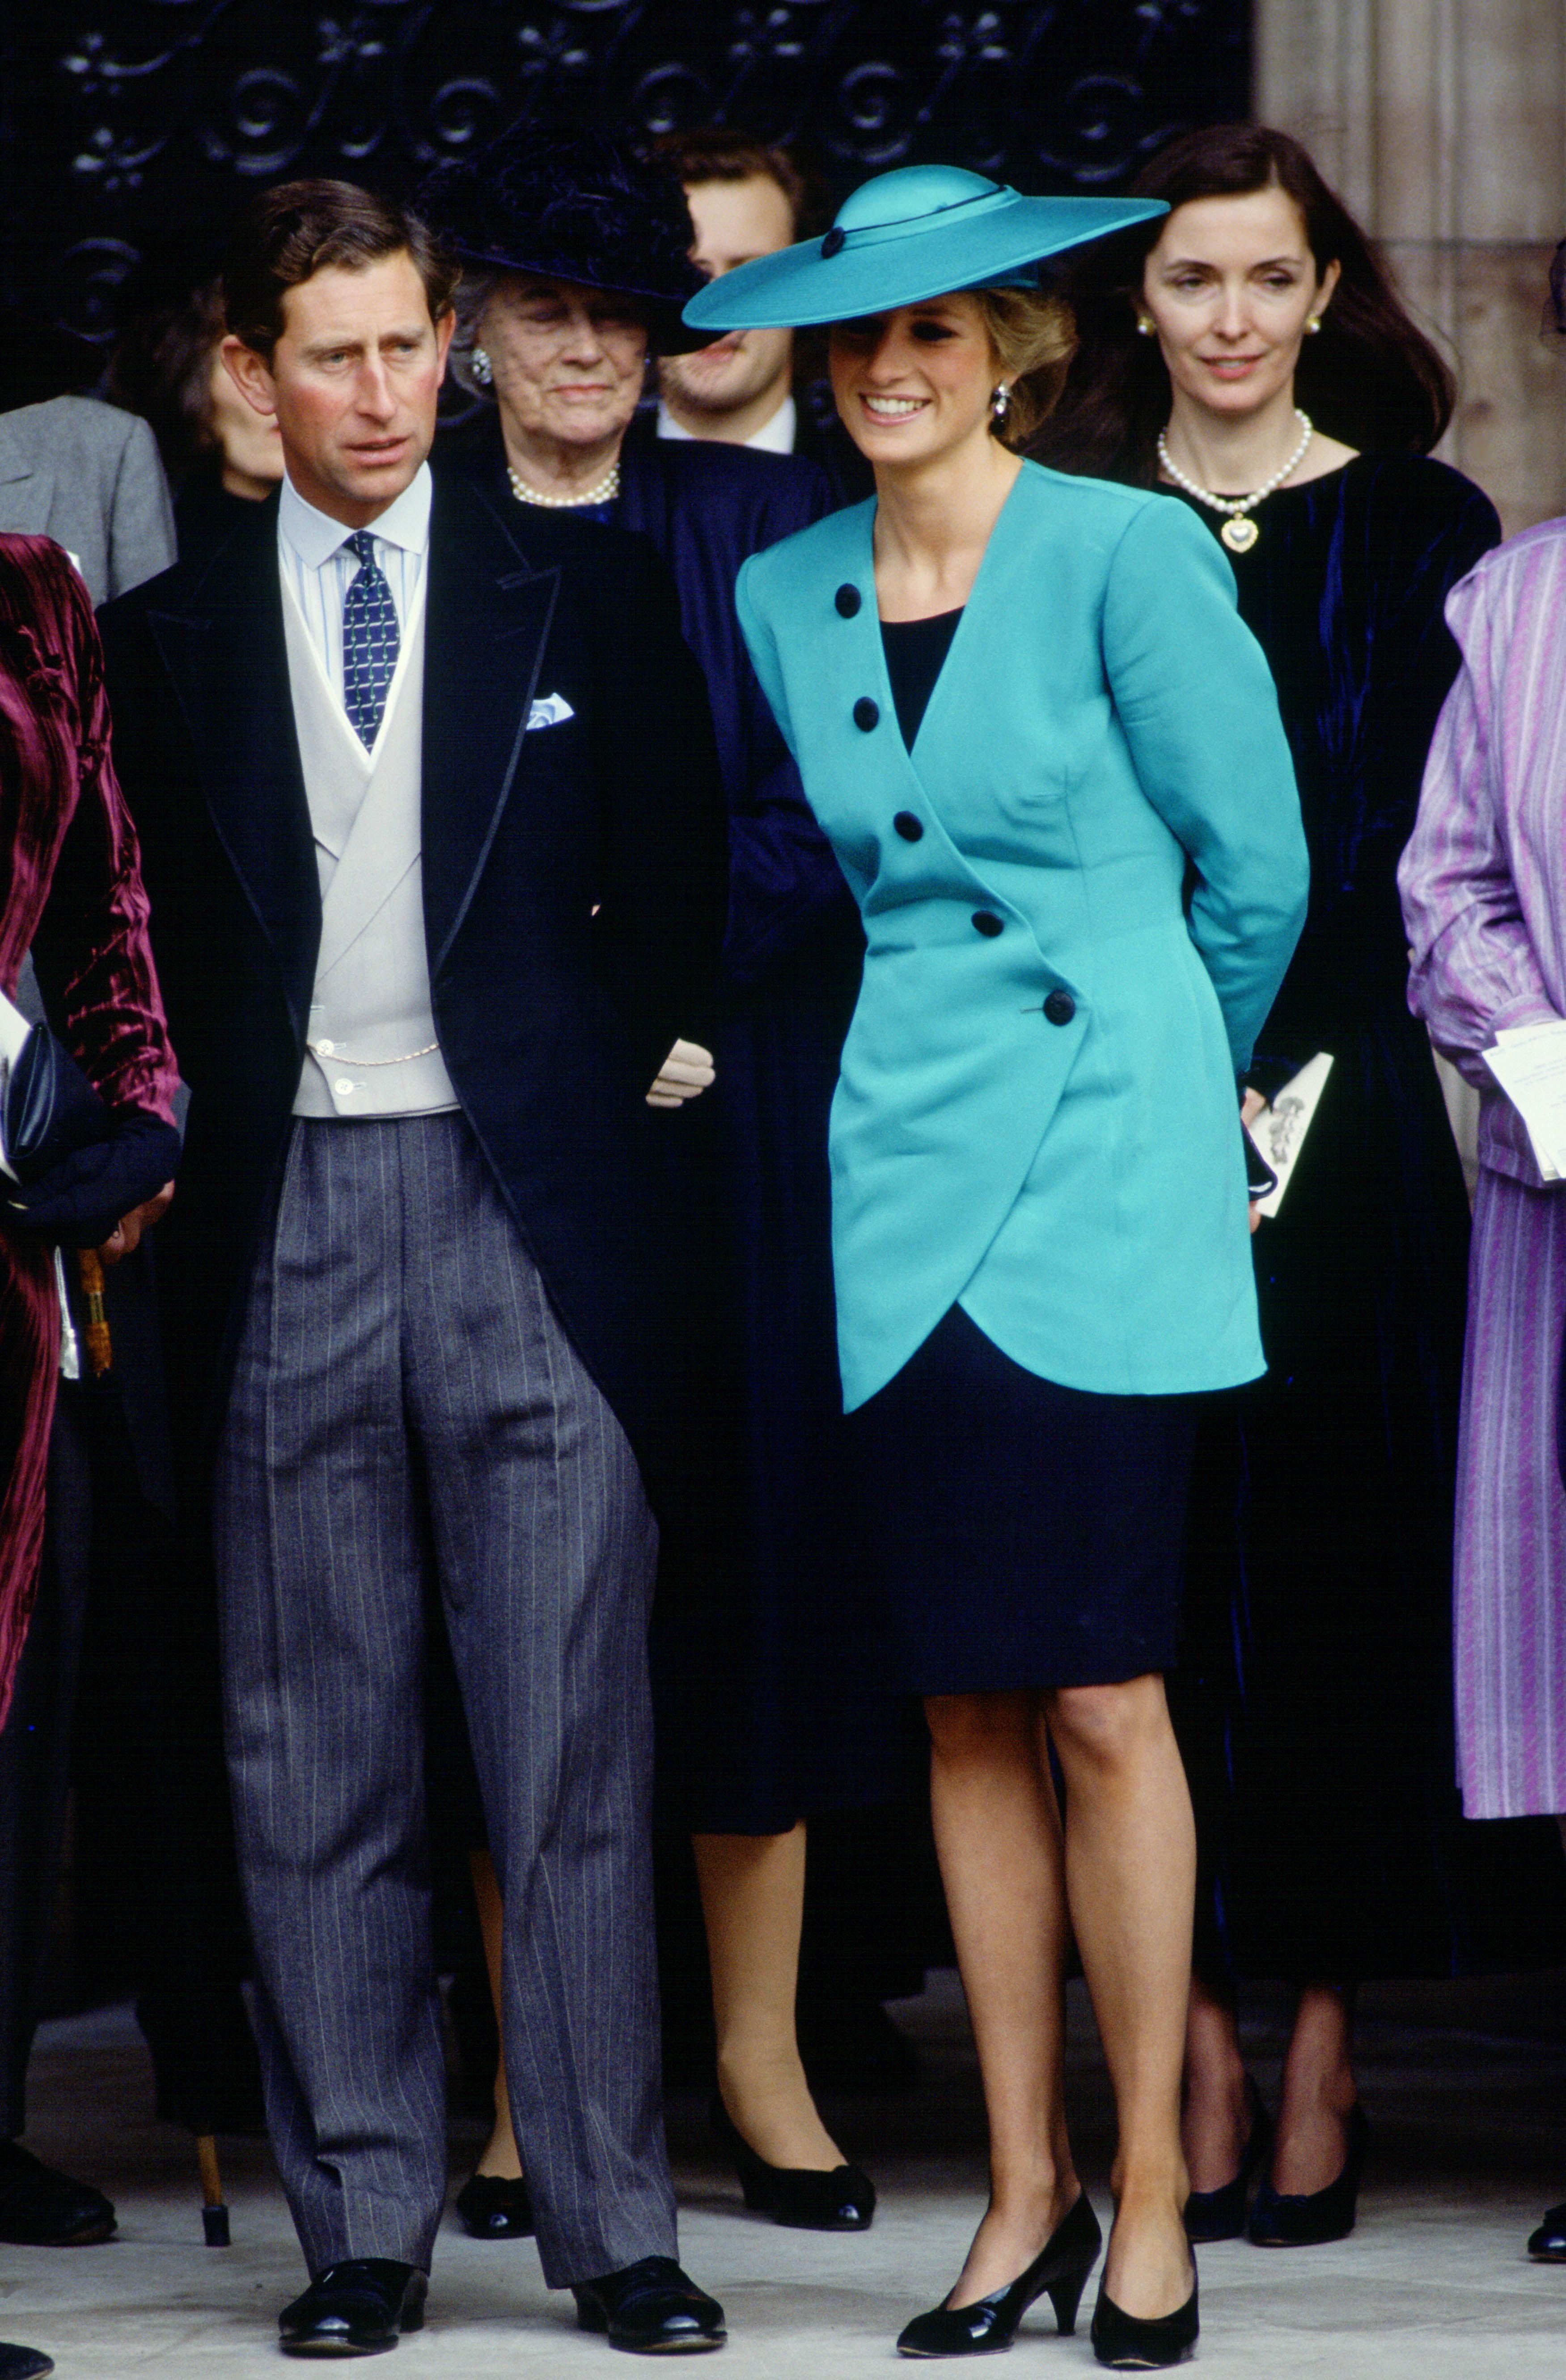 Prince Charles and Princess Diana in 1988 | Source: Getty Images